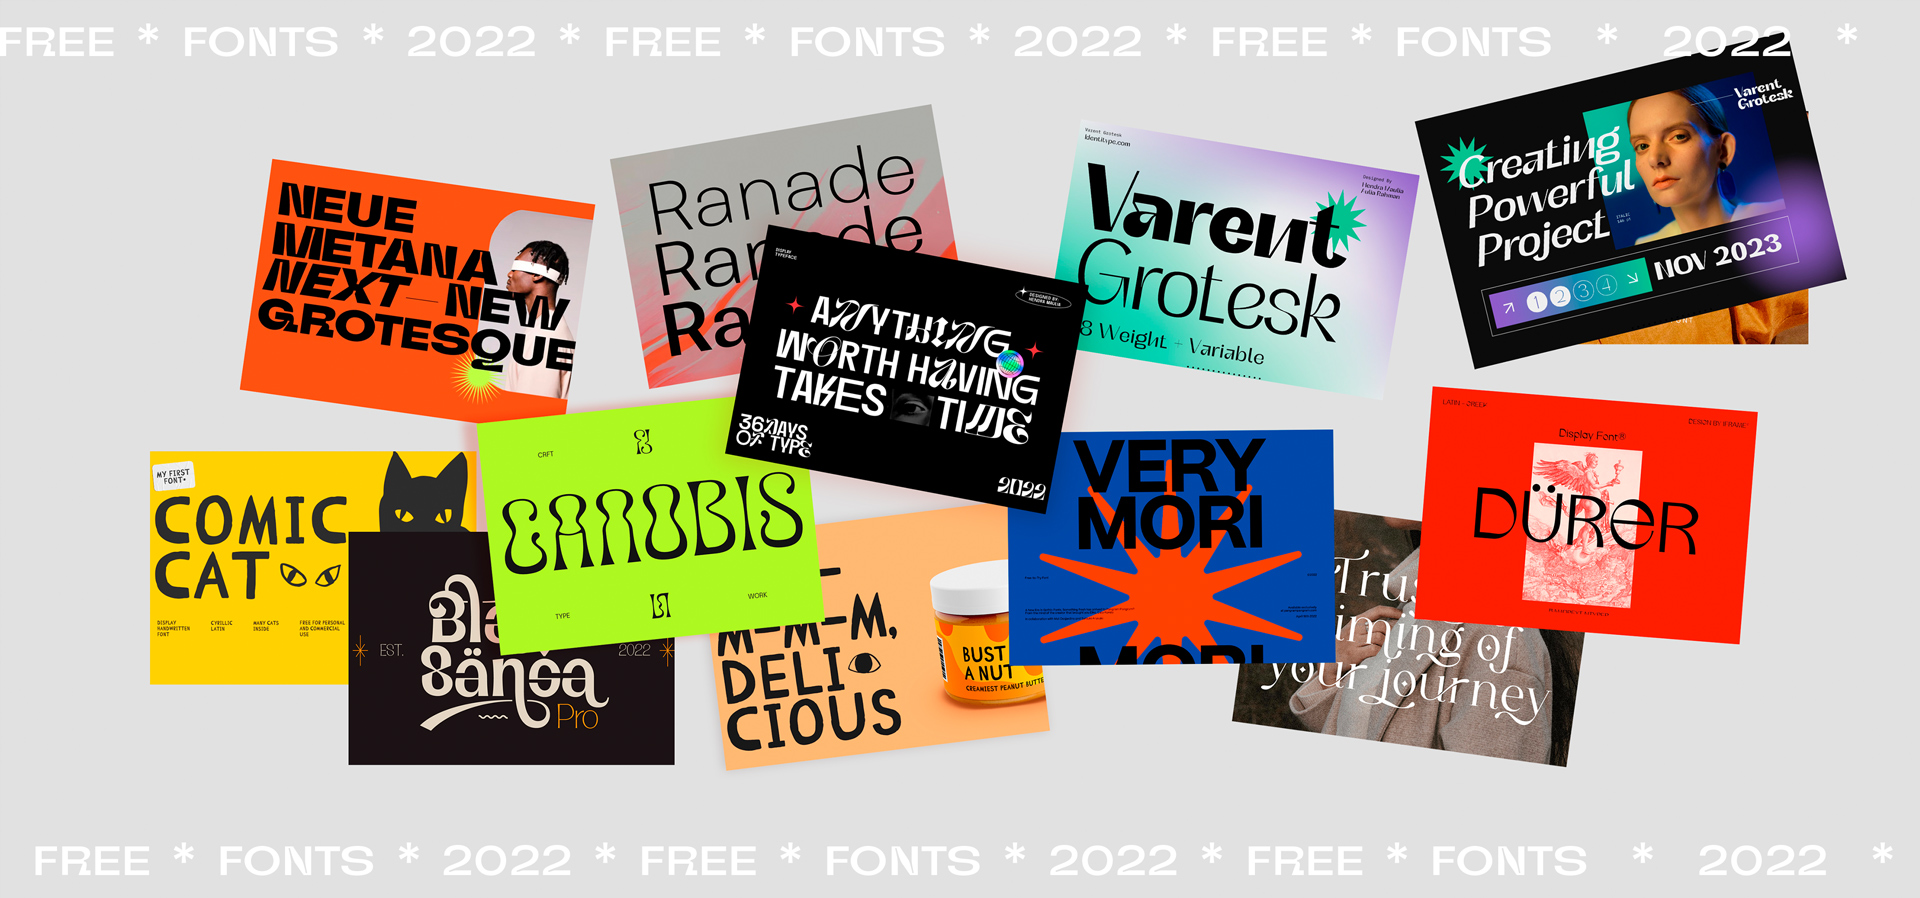 100 Best Free Fonts for Designers in 2022